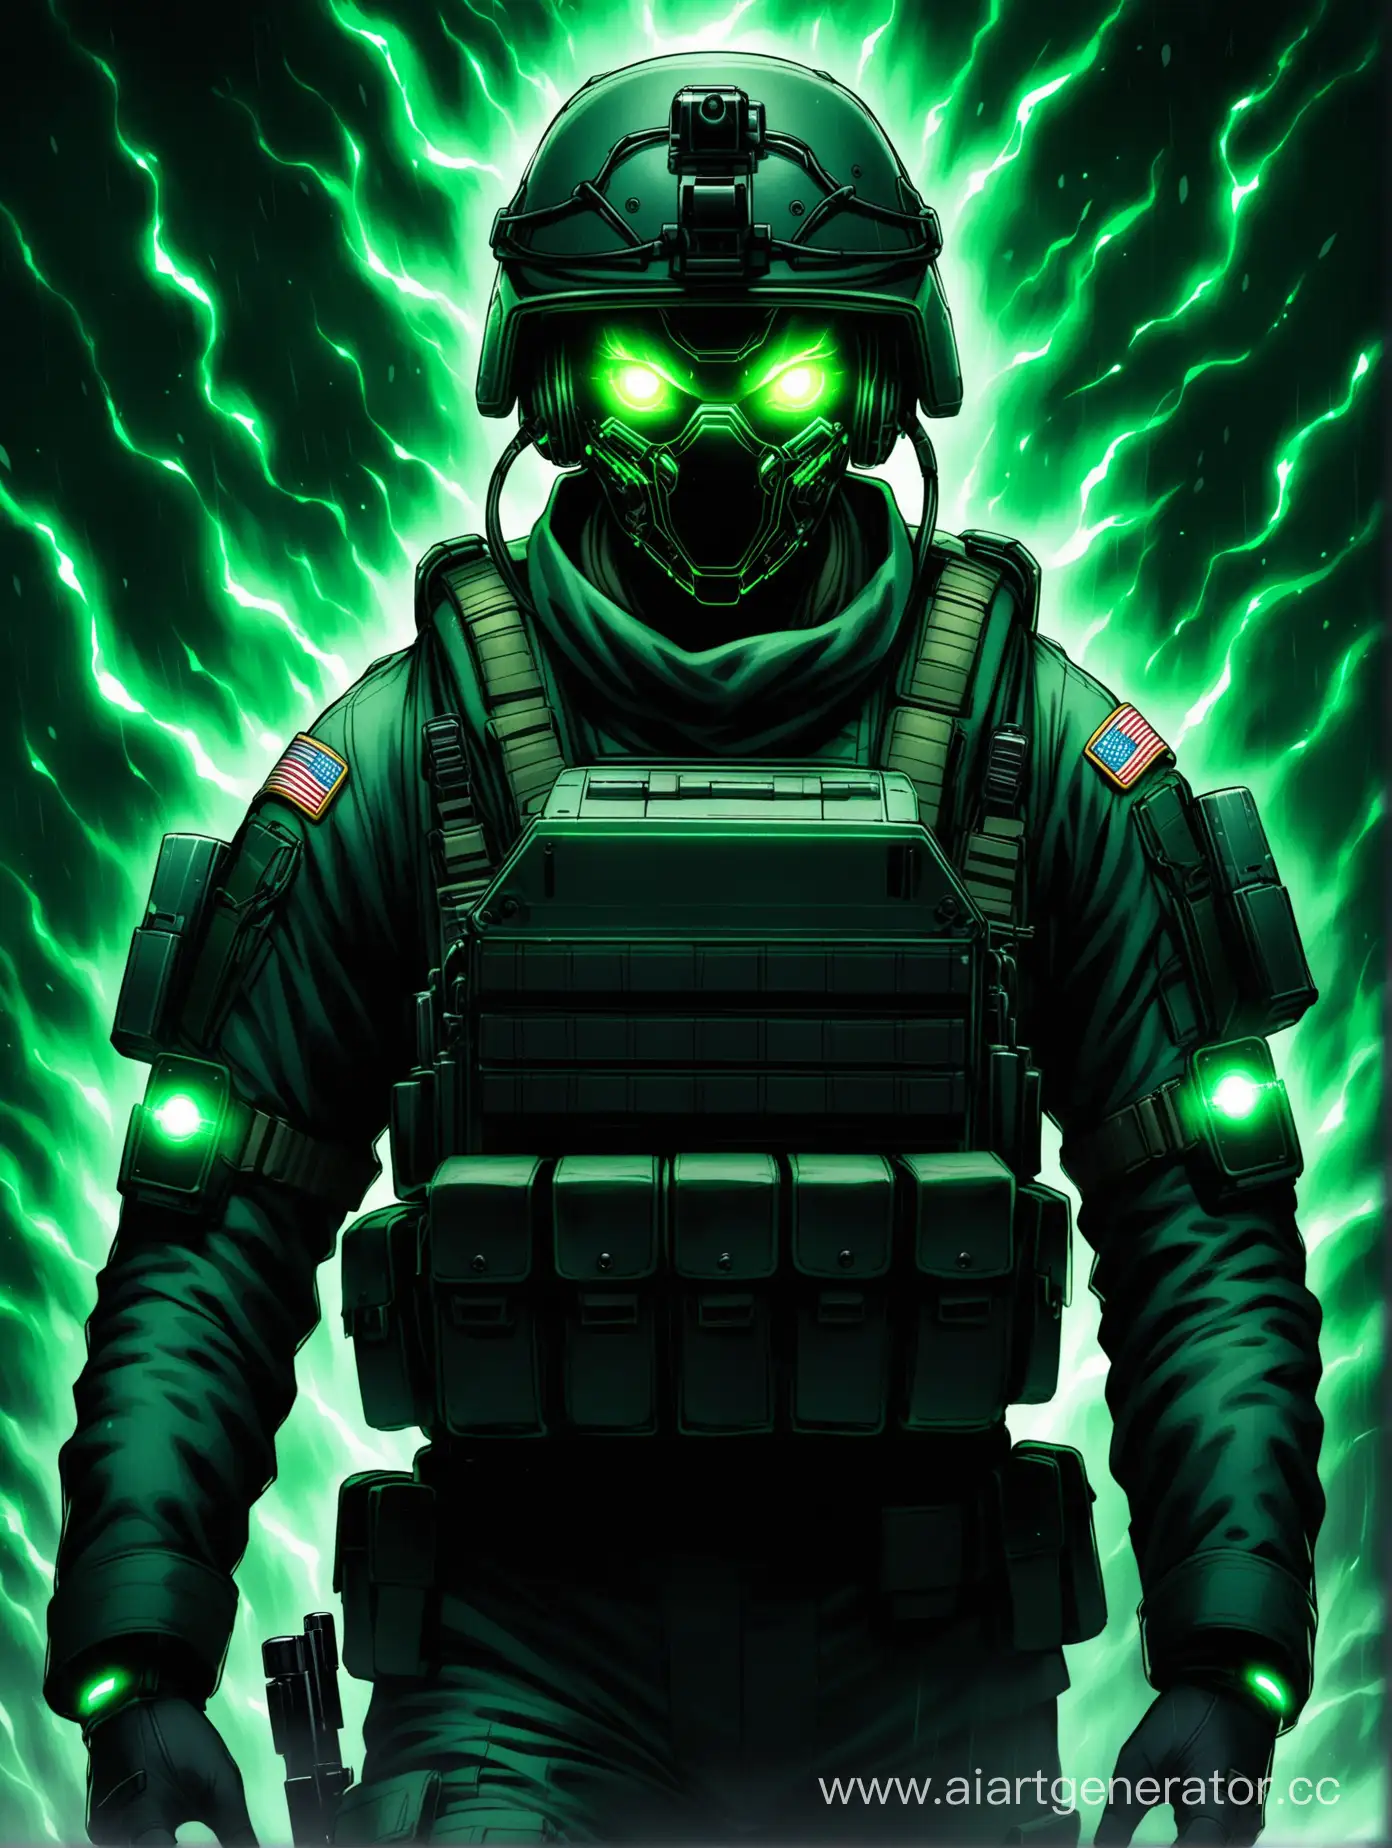 GlowingEyed-Military-Soldier-in-Futuristic-Setting